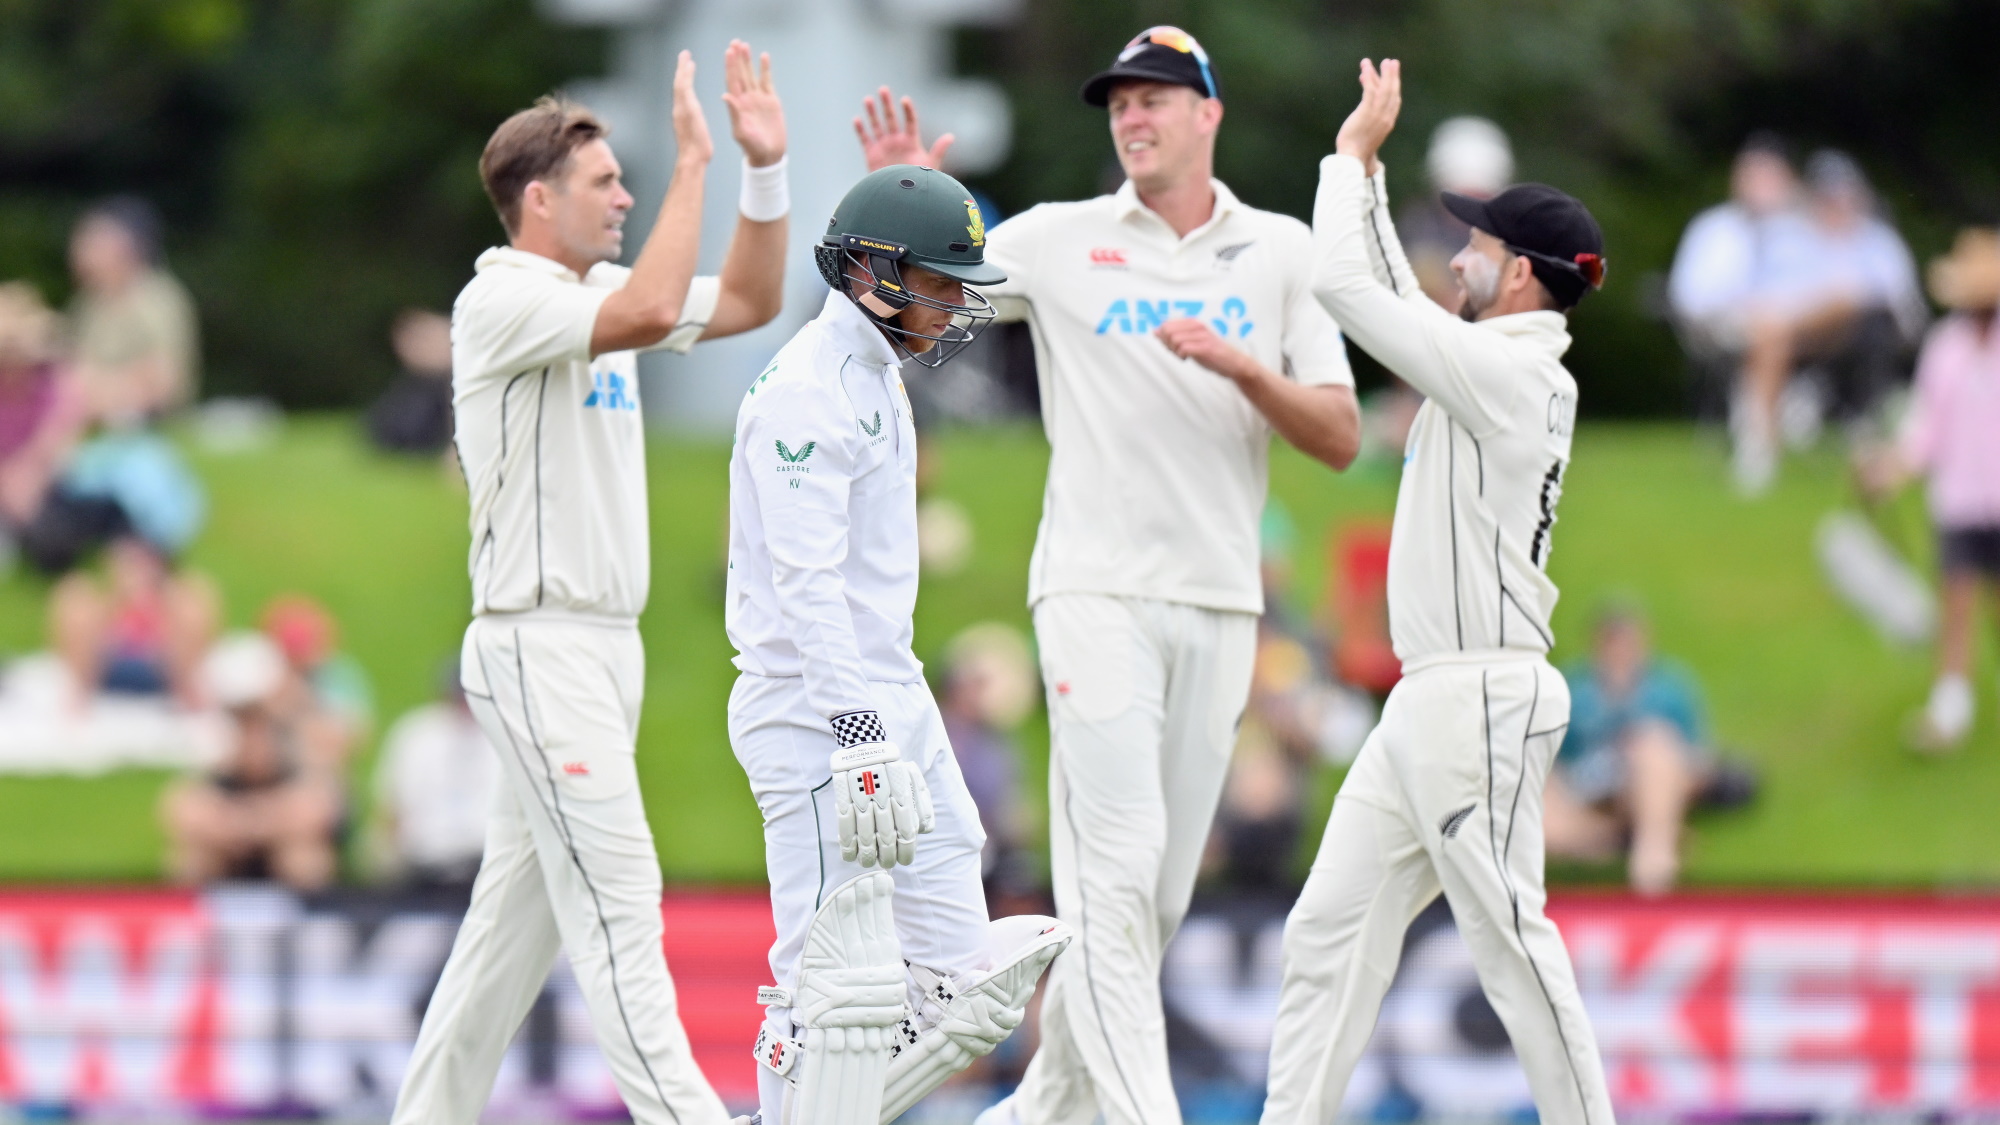 New Zealand vs South Africa live stream how to watch 2nd Test cricket online from anywhere TechRadar